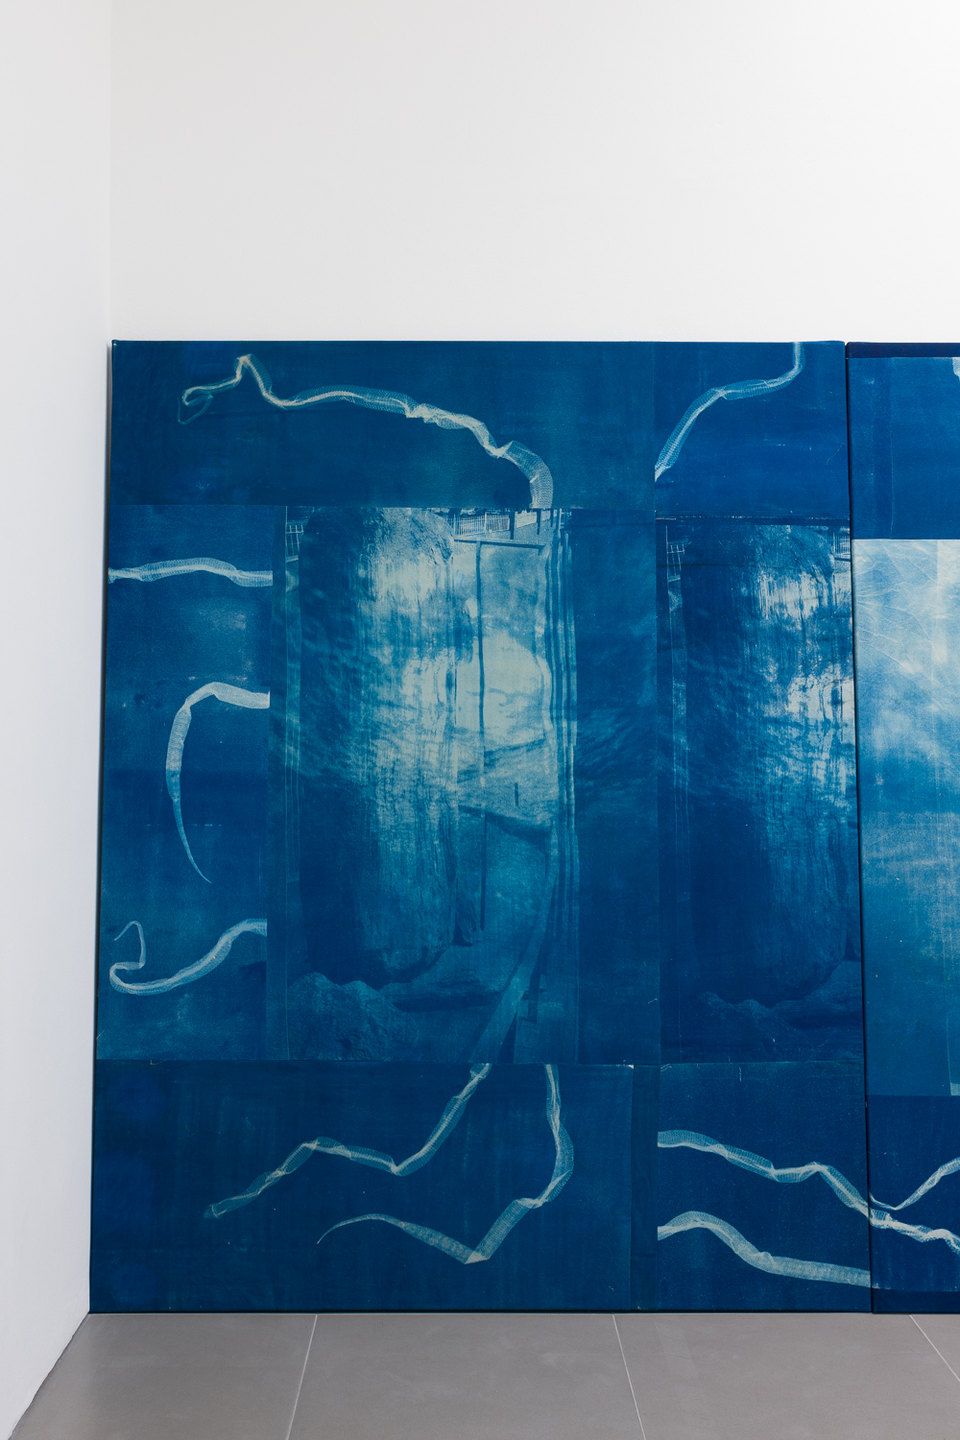 Felix Melia, 'Back to Reality', from 'Stages', 2022, cyanotype print on cotton